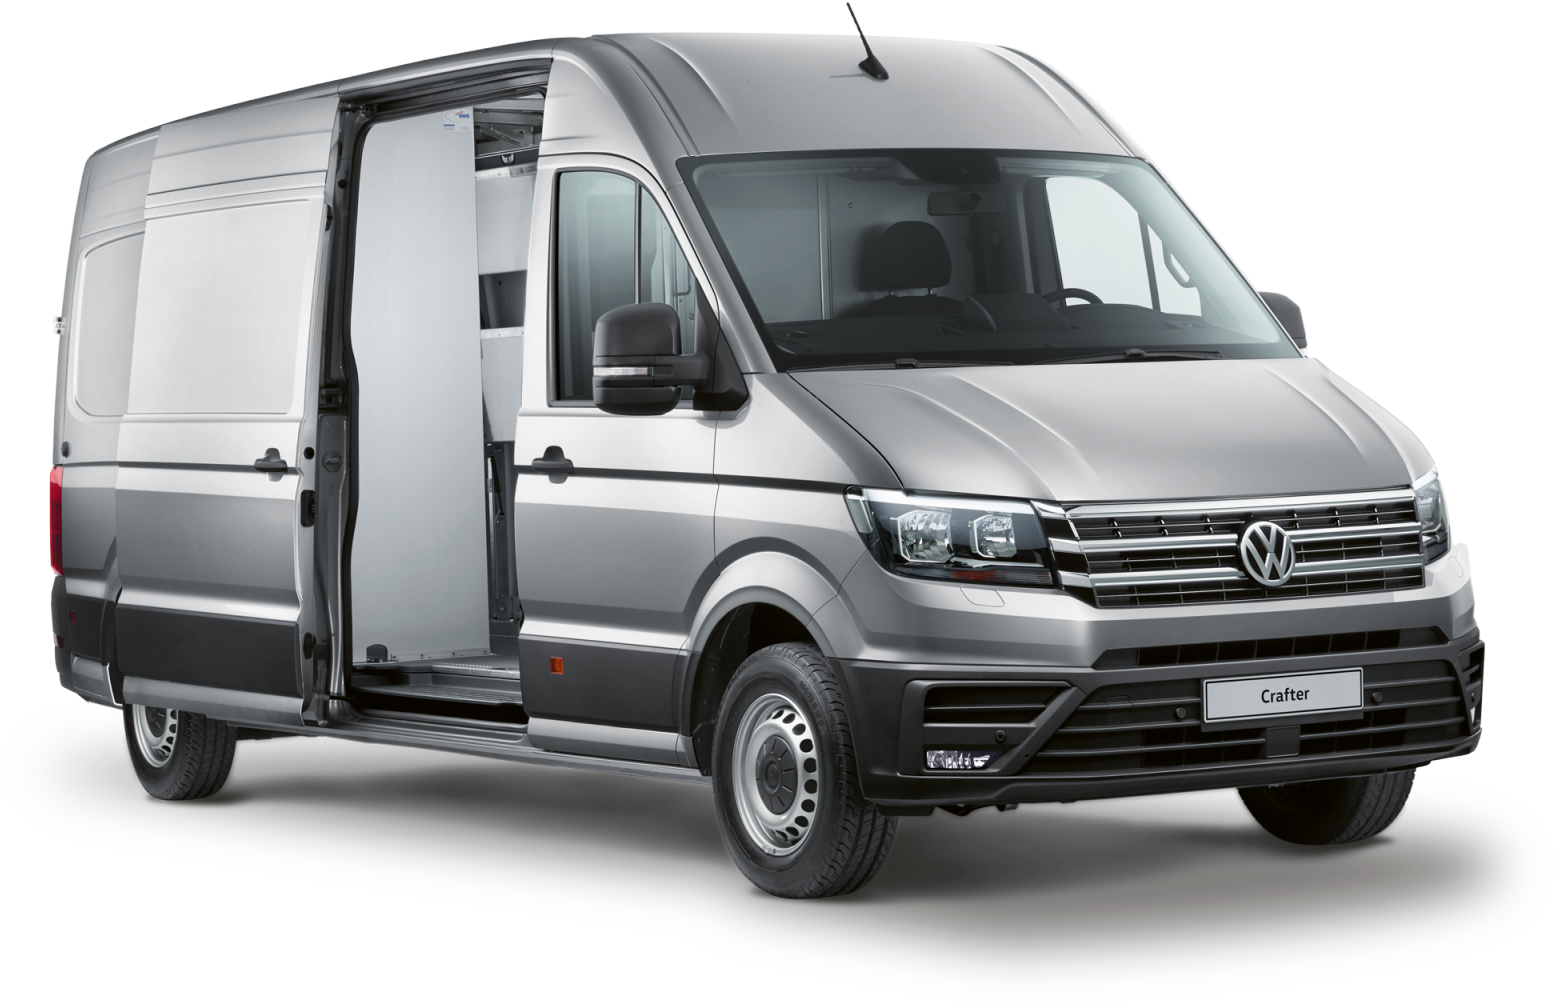 Crafter/crafter Delivery Van/cr1020 Vw Crafter Delivery - Compact Van (2048x1152), Png Download